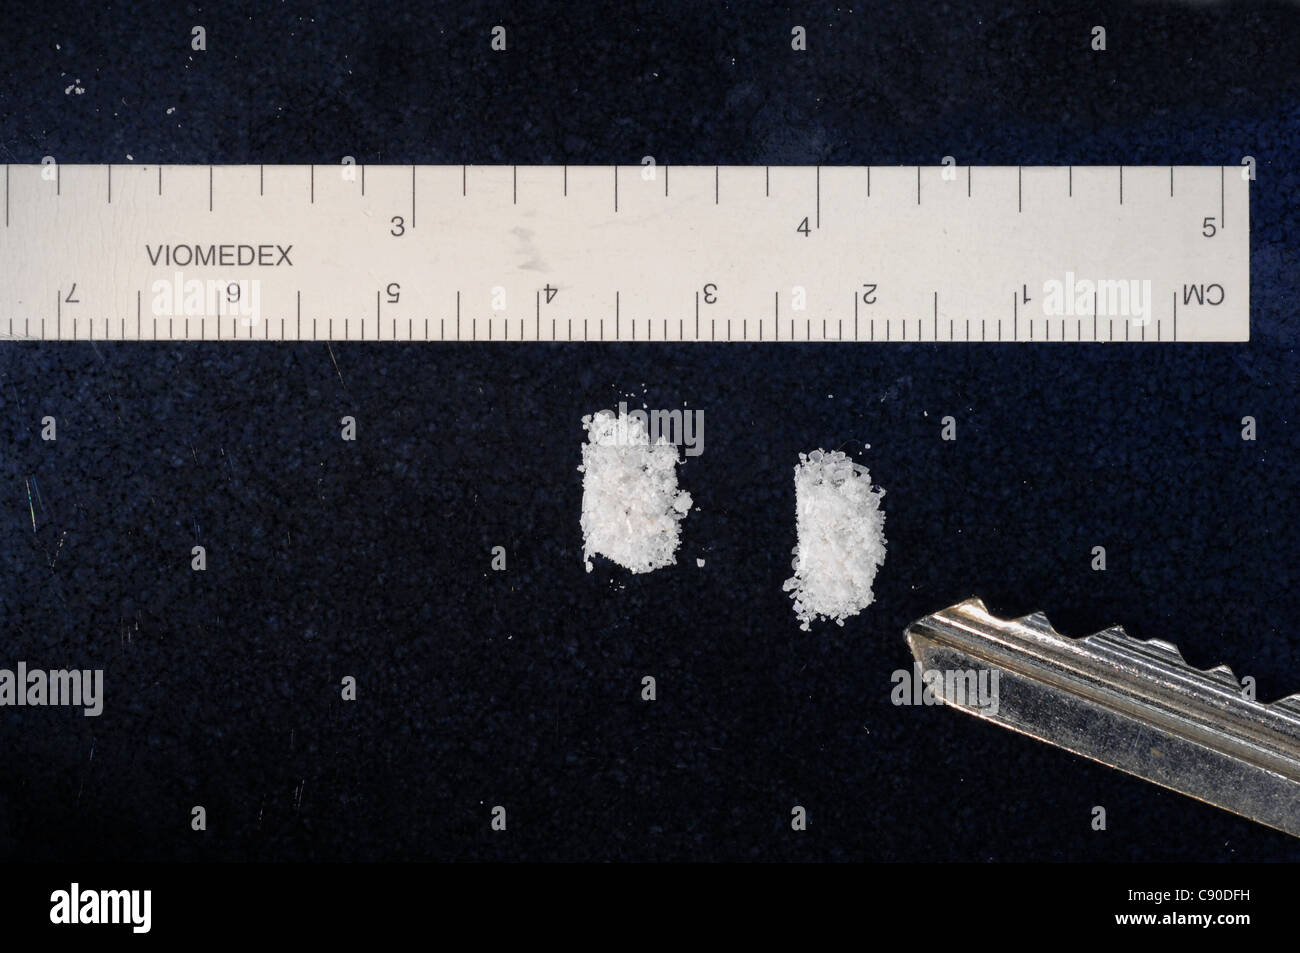 25mg-ketamine-bump-with-key-and-ruler-for-scale-C90DFH.jpg